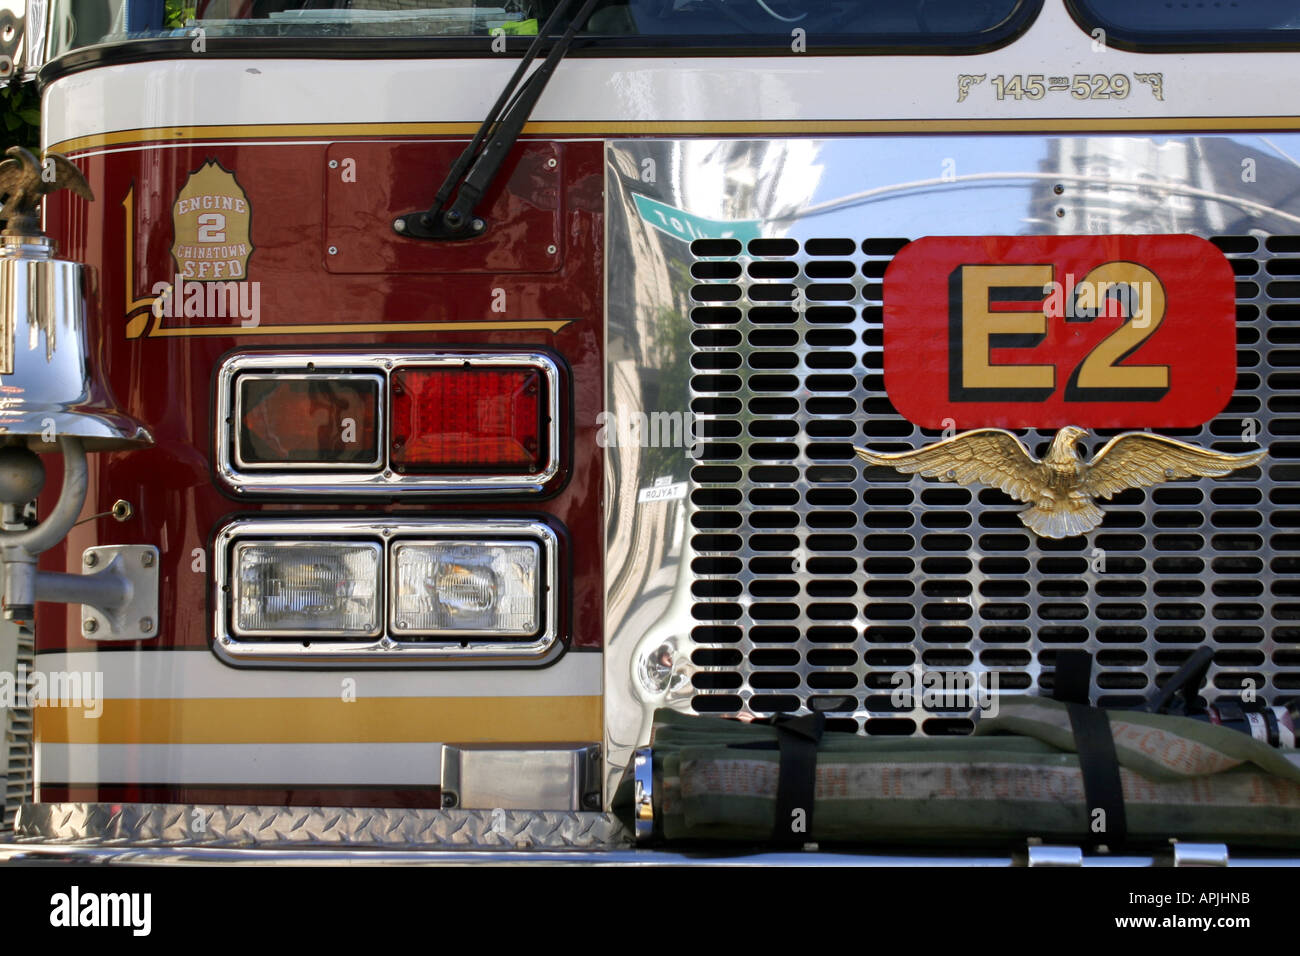 San Francisco Fire Engine front detail close up Stock Photo